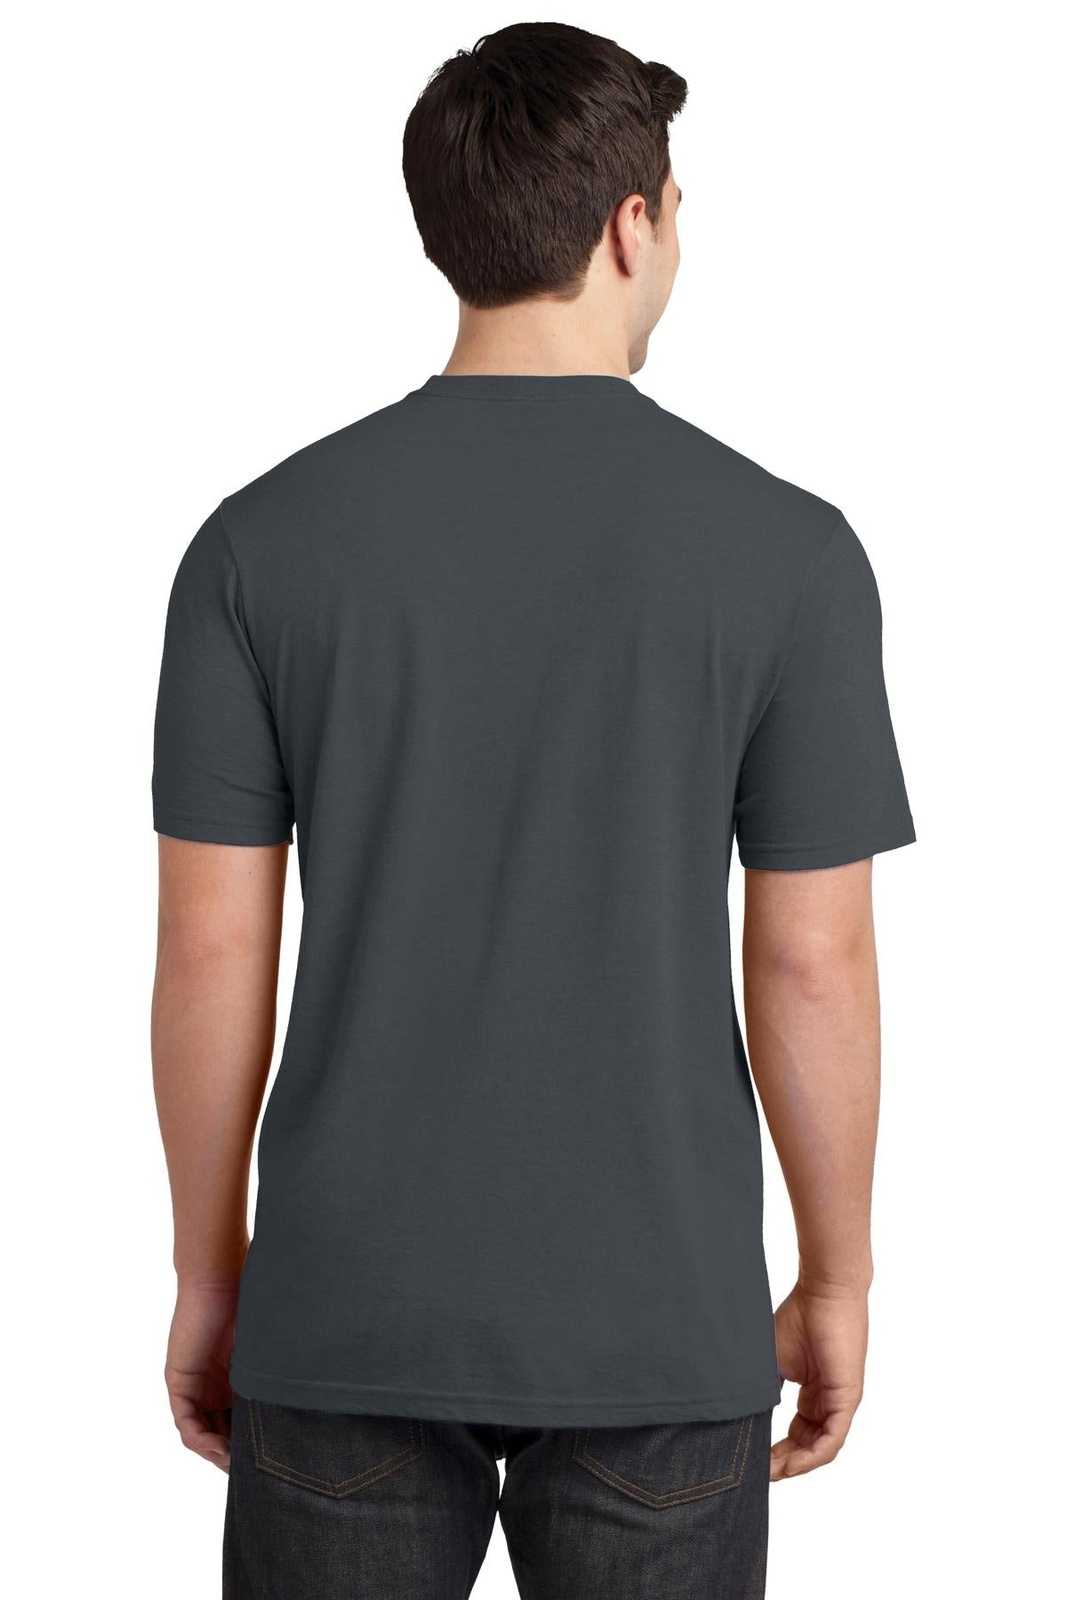 District DT6000P Very Important Tee with Pocket - Charcoal - HIT a Double - 2